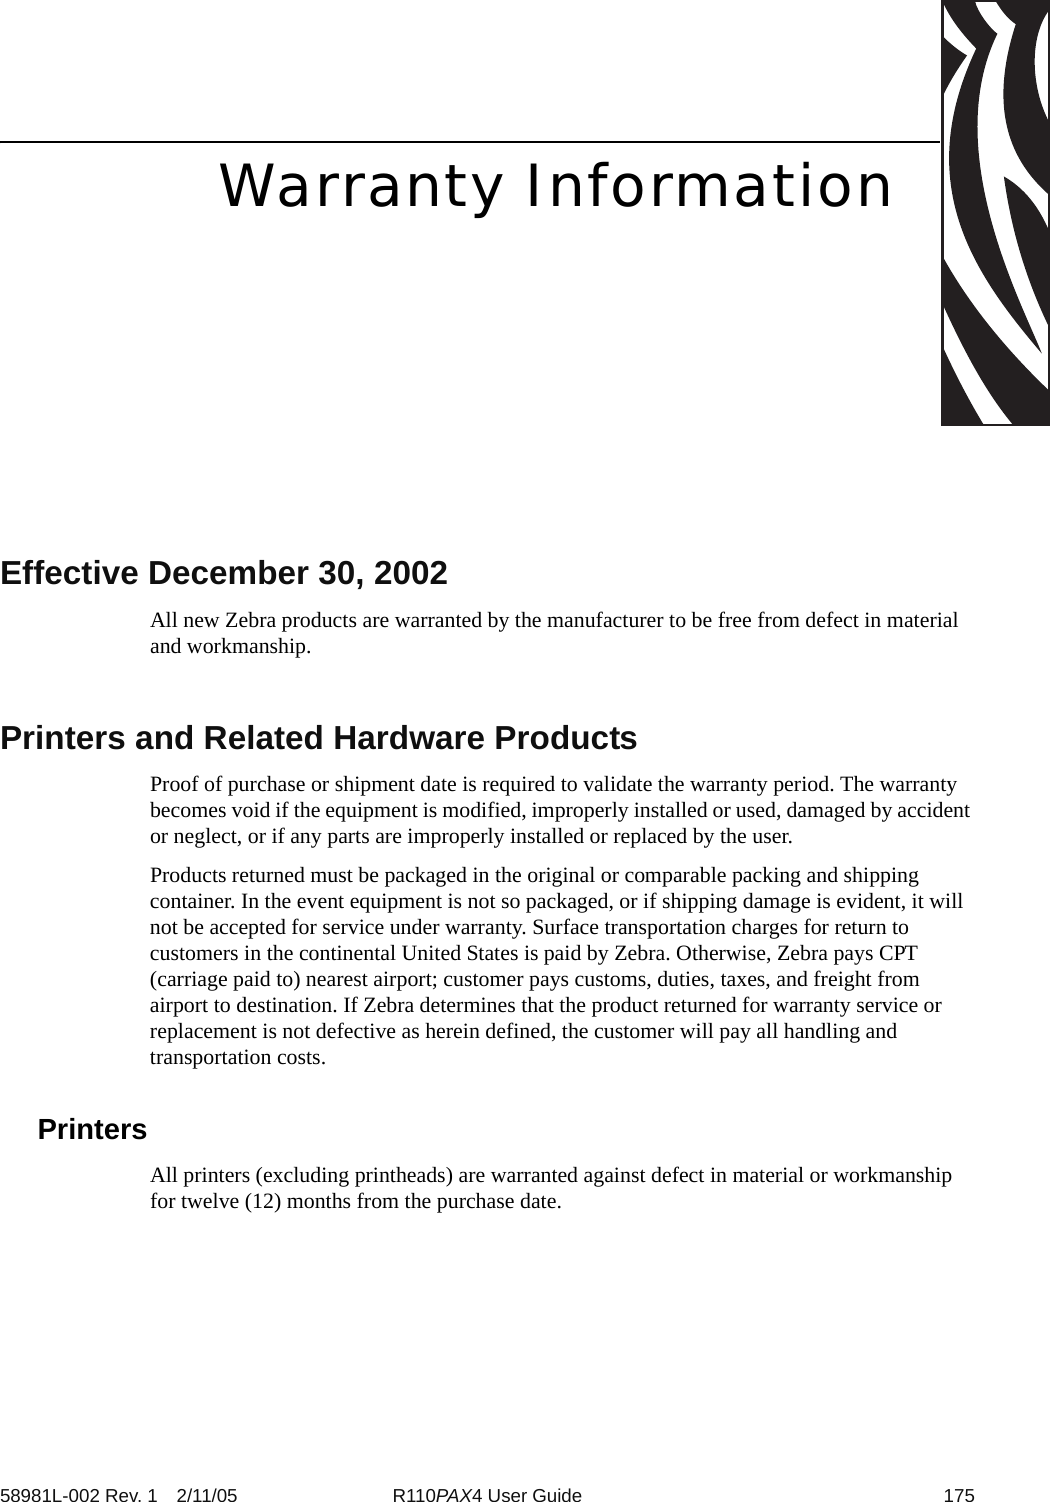 58981L-002 Rev. 1 2/11/05 R110PAX4 User Guide 175Warranty InformationEffective December 30, 2002All new Zebra products are warranted by the manufacturer to be free from defect in material and workmanship. Printers and Related Hardware ProductsProof of purchase or shipment date is required to validate the warranty period. The warranty becomes void if the equipment is modified, improperly installed or used, damaged by accident or neglect, or if any parts are improperly installed or replaced by the user.Products returned must be packaged in the original or comparable packing and shipping container. In the event equipment is not so packaged, or if shipping damage is evident, it will not be accepted for service under warranty. Surface transportation charges for return to customers in the continental United States is paid by Zebra. Otherwise, Zebra pays CPT (carriage paid to) nearest airport; customer pays customs, duties, taxes, and freight from airport to destination. If Zebra determines that the product returned for warranty service or replacement is not defective as herein defined, the customer will pay all handling and transportation costs.PrintersAll printers (excluding printheads) are warranted against defect in material or workmanship for twelve (12) months from the purchase date.